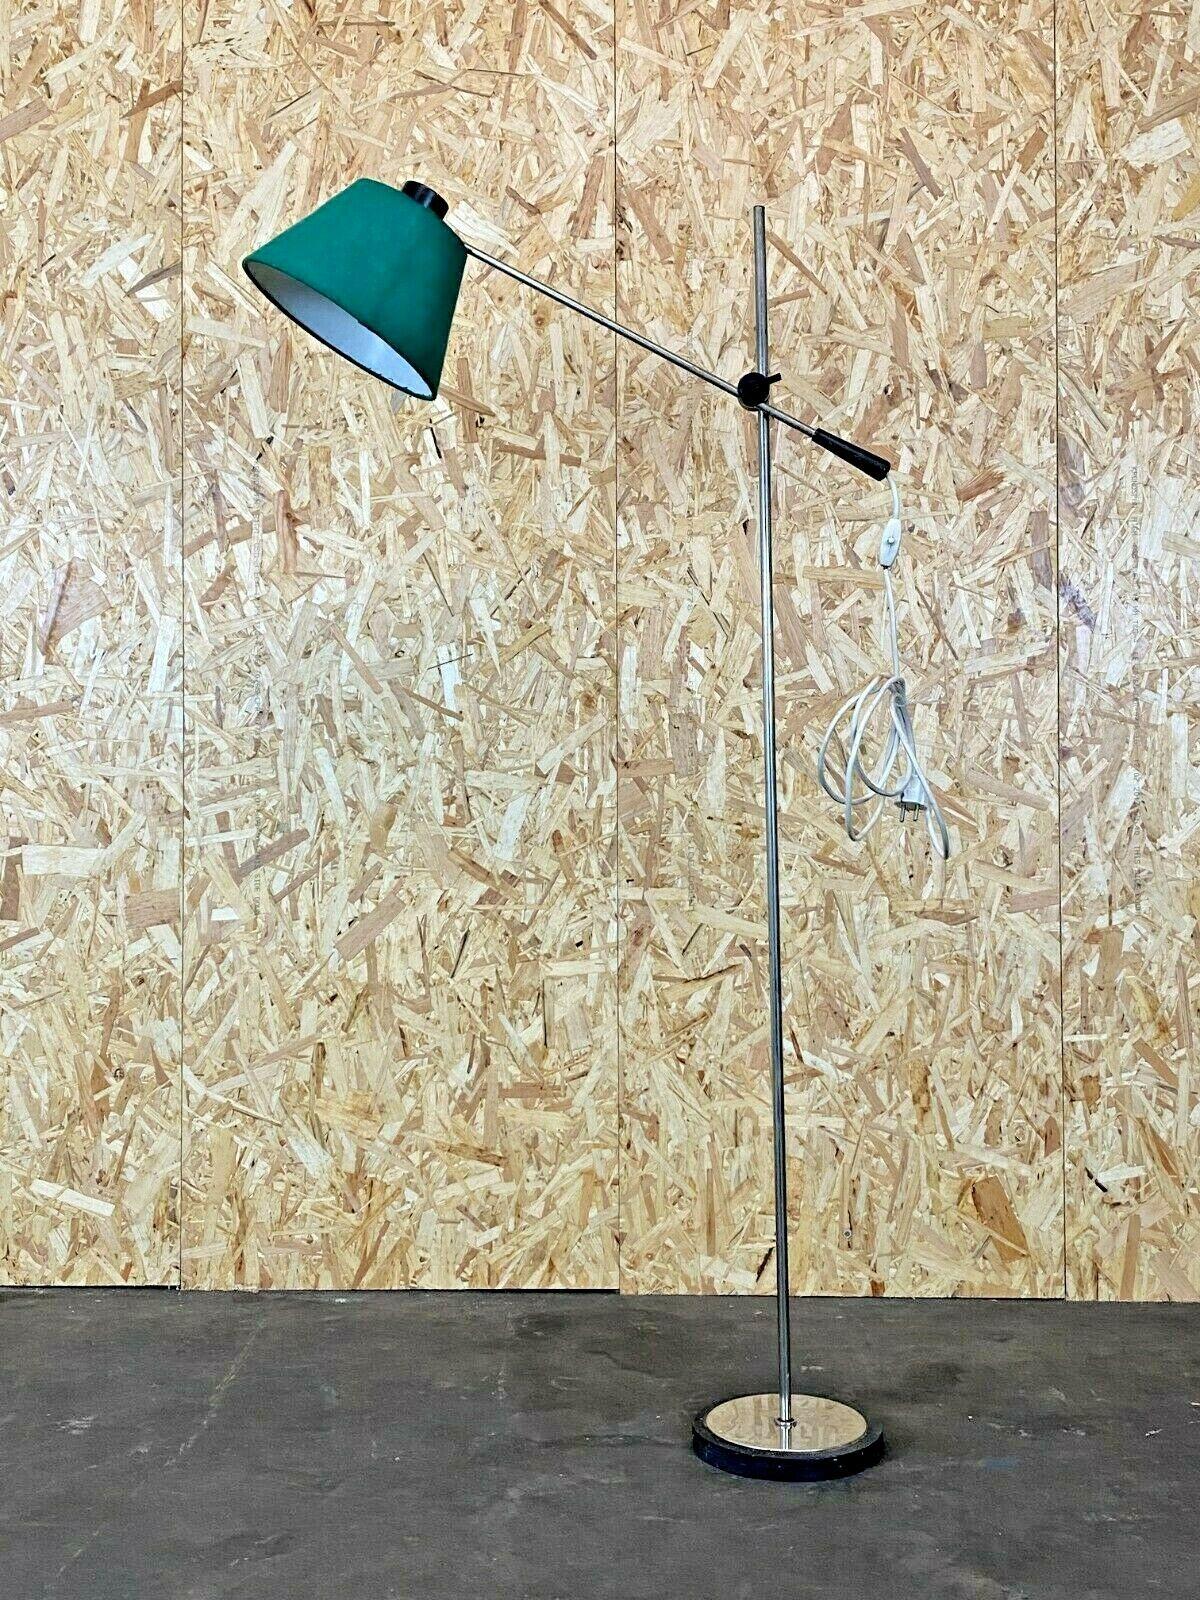 60s 70s floor lamp floor lamp floor lamp lamp space age design metal

Object: floor lamp

Manufacturer:

Condition: good (vintage)

Age: around 1960-1970

Dimensions:

80cm x 25cm x 140cm

Other notes:

The pictures serve as part of